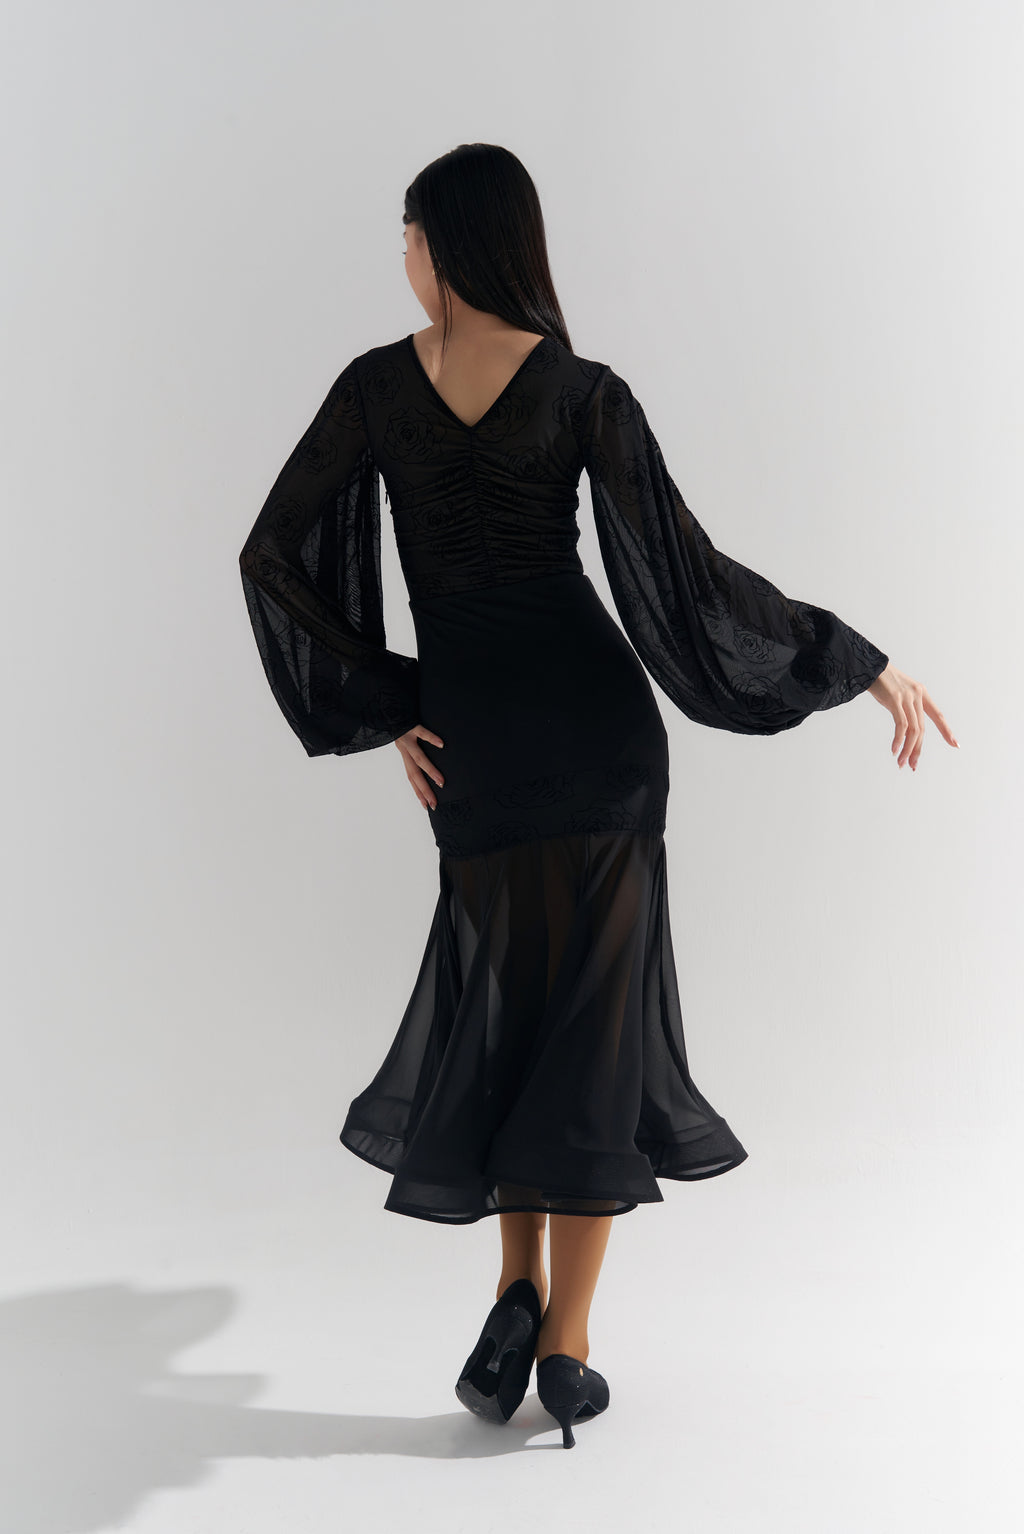 DQ-575 Black Rose Tailor-Made Modern Dress with Cutout at Front